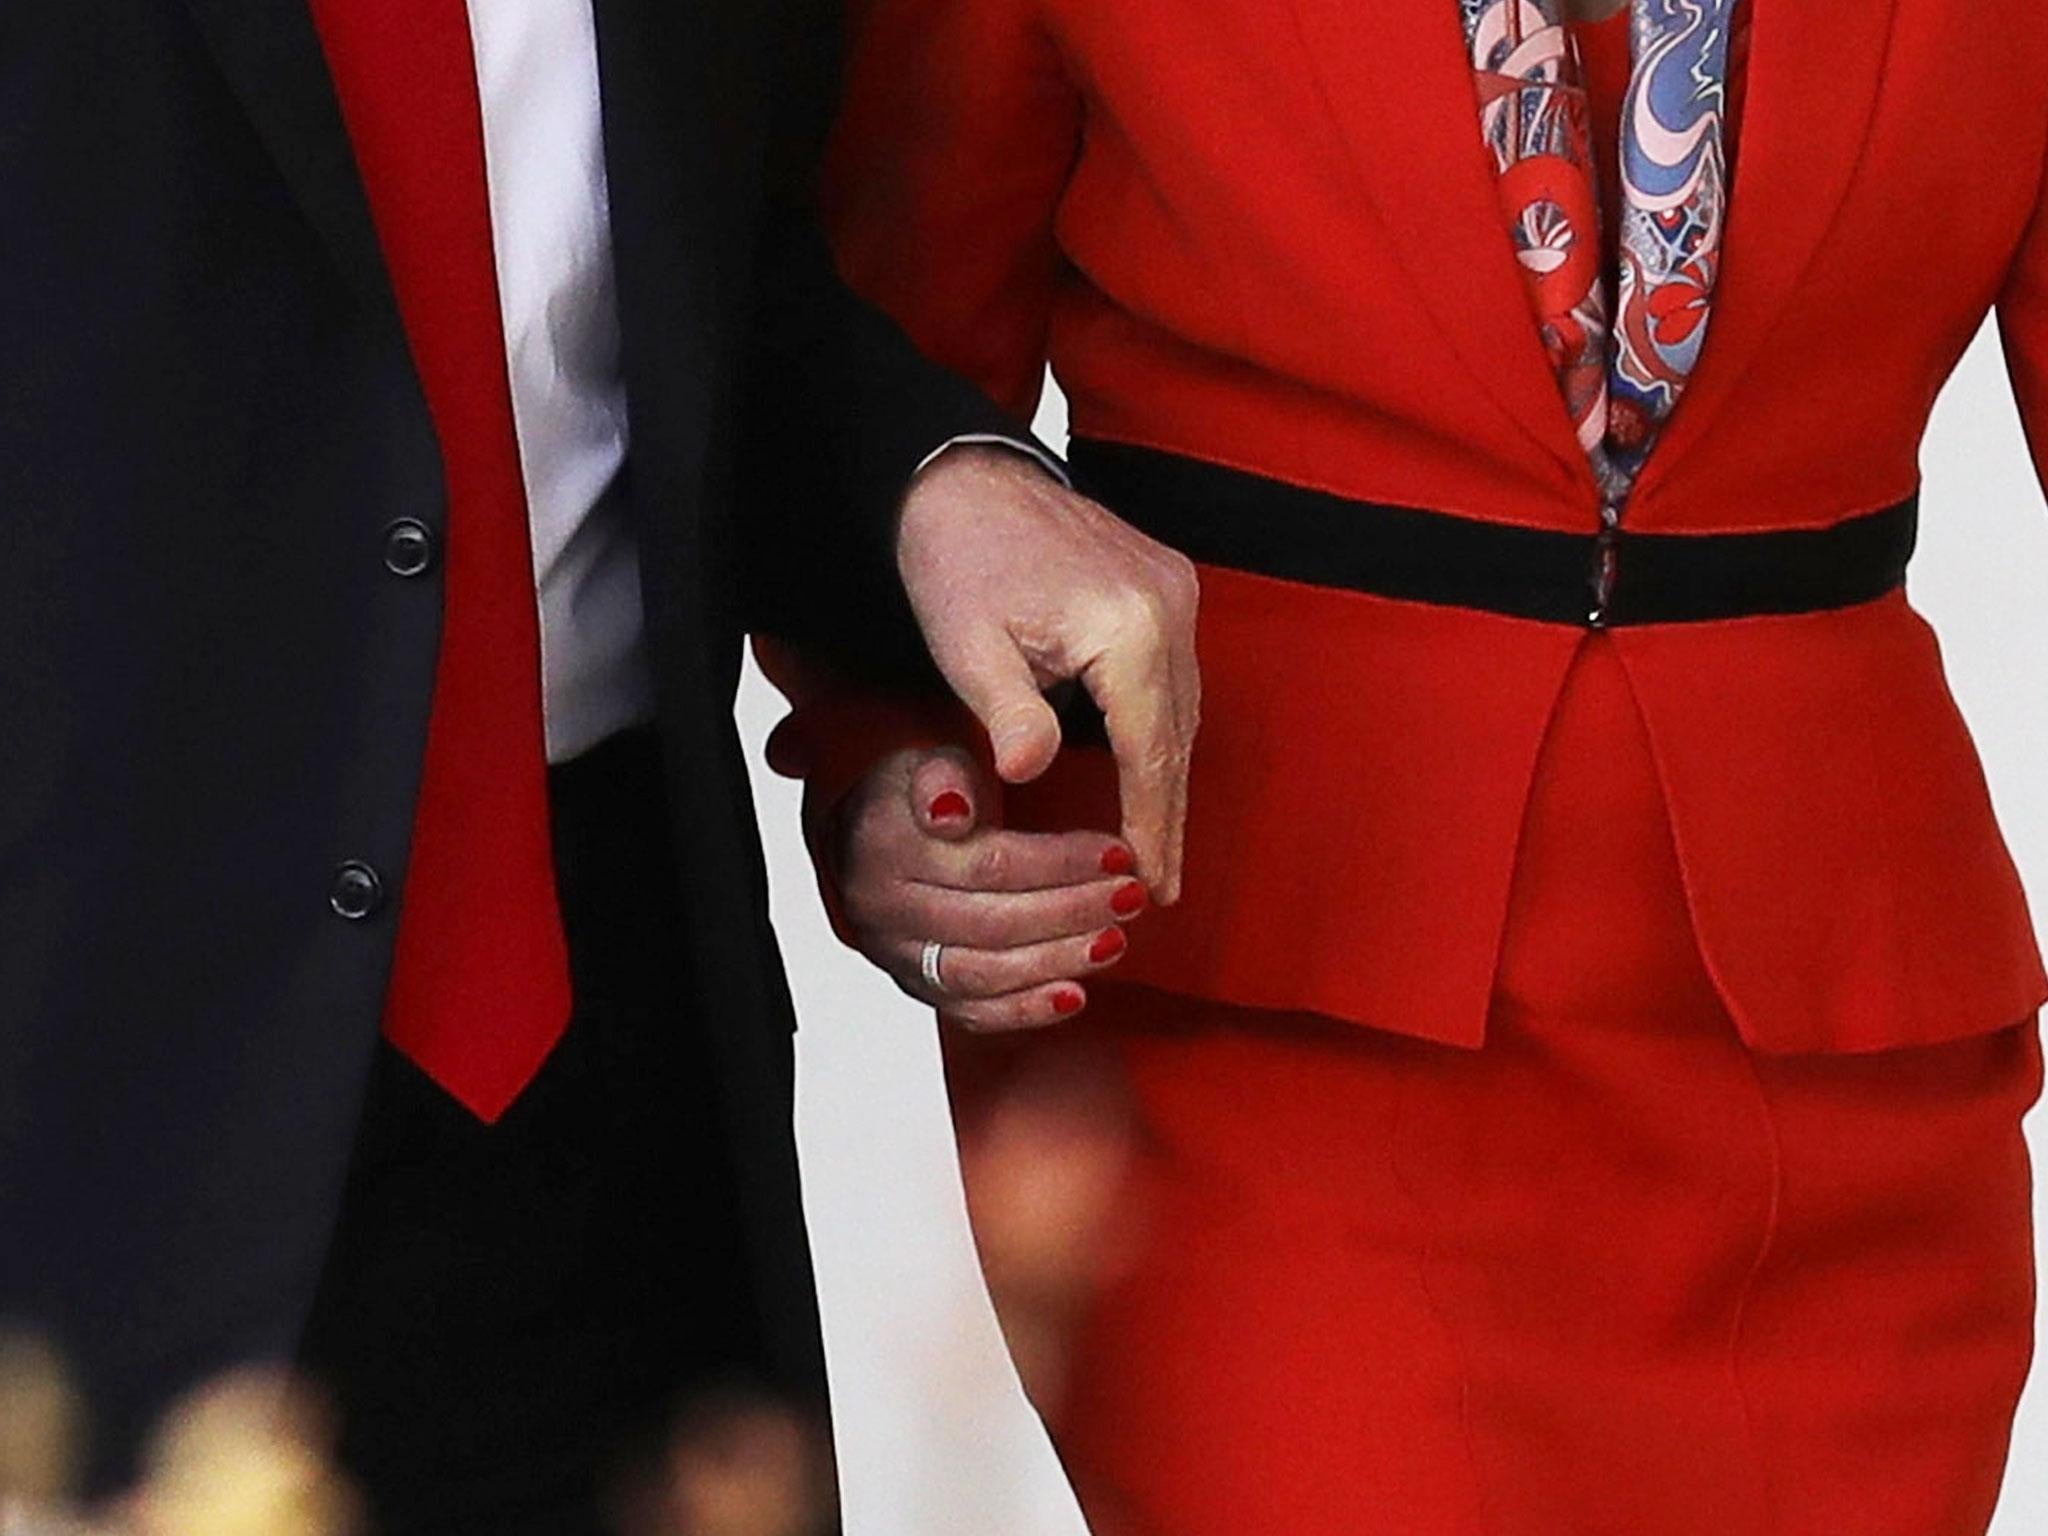 Theresa May was the first world leader to visit Donald Trump